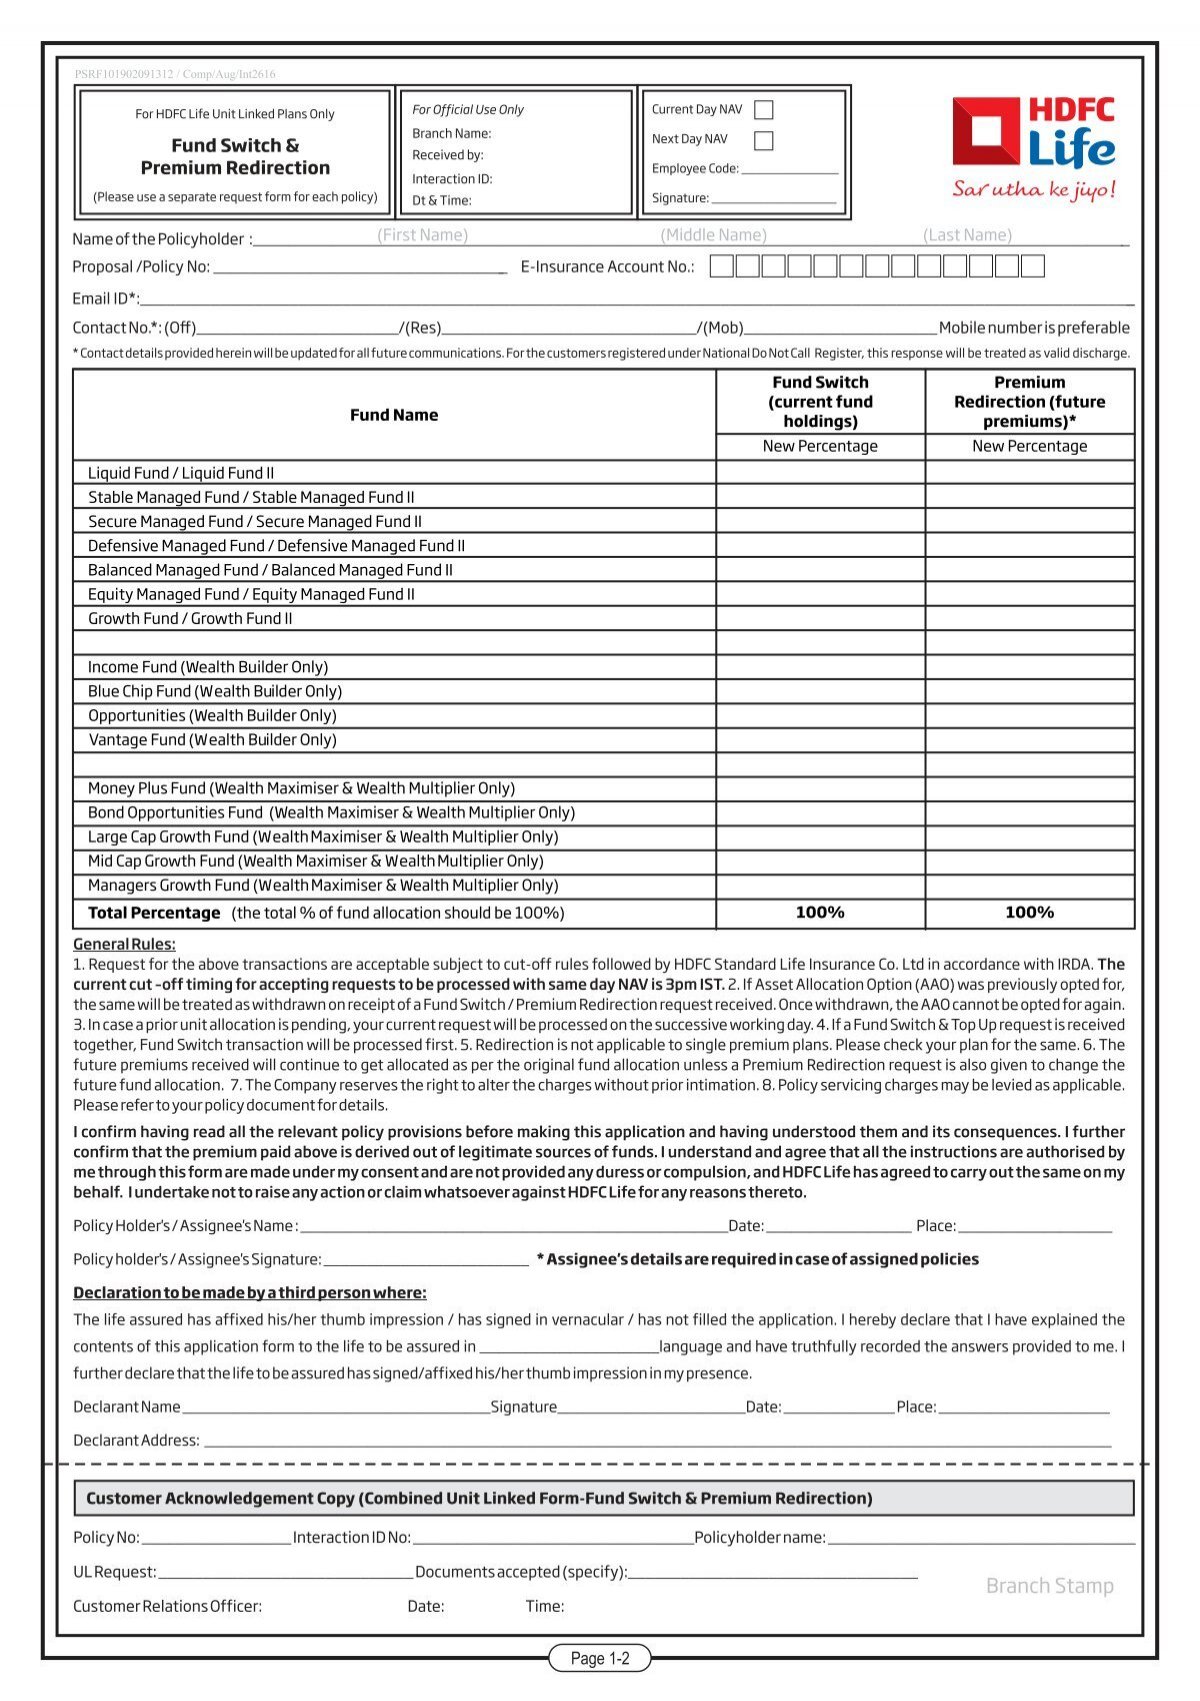 hdfc life policy assignment form